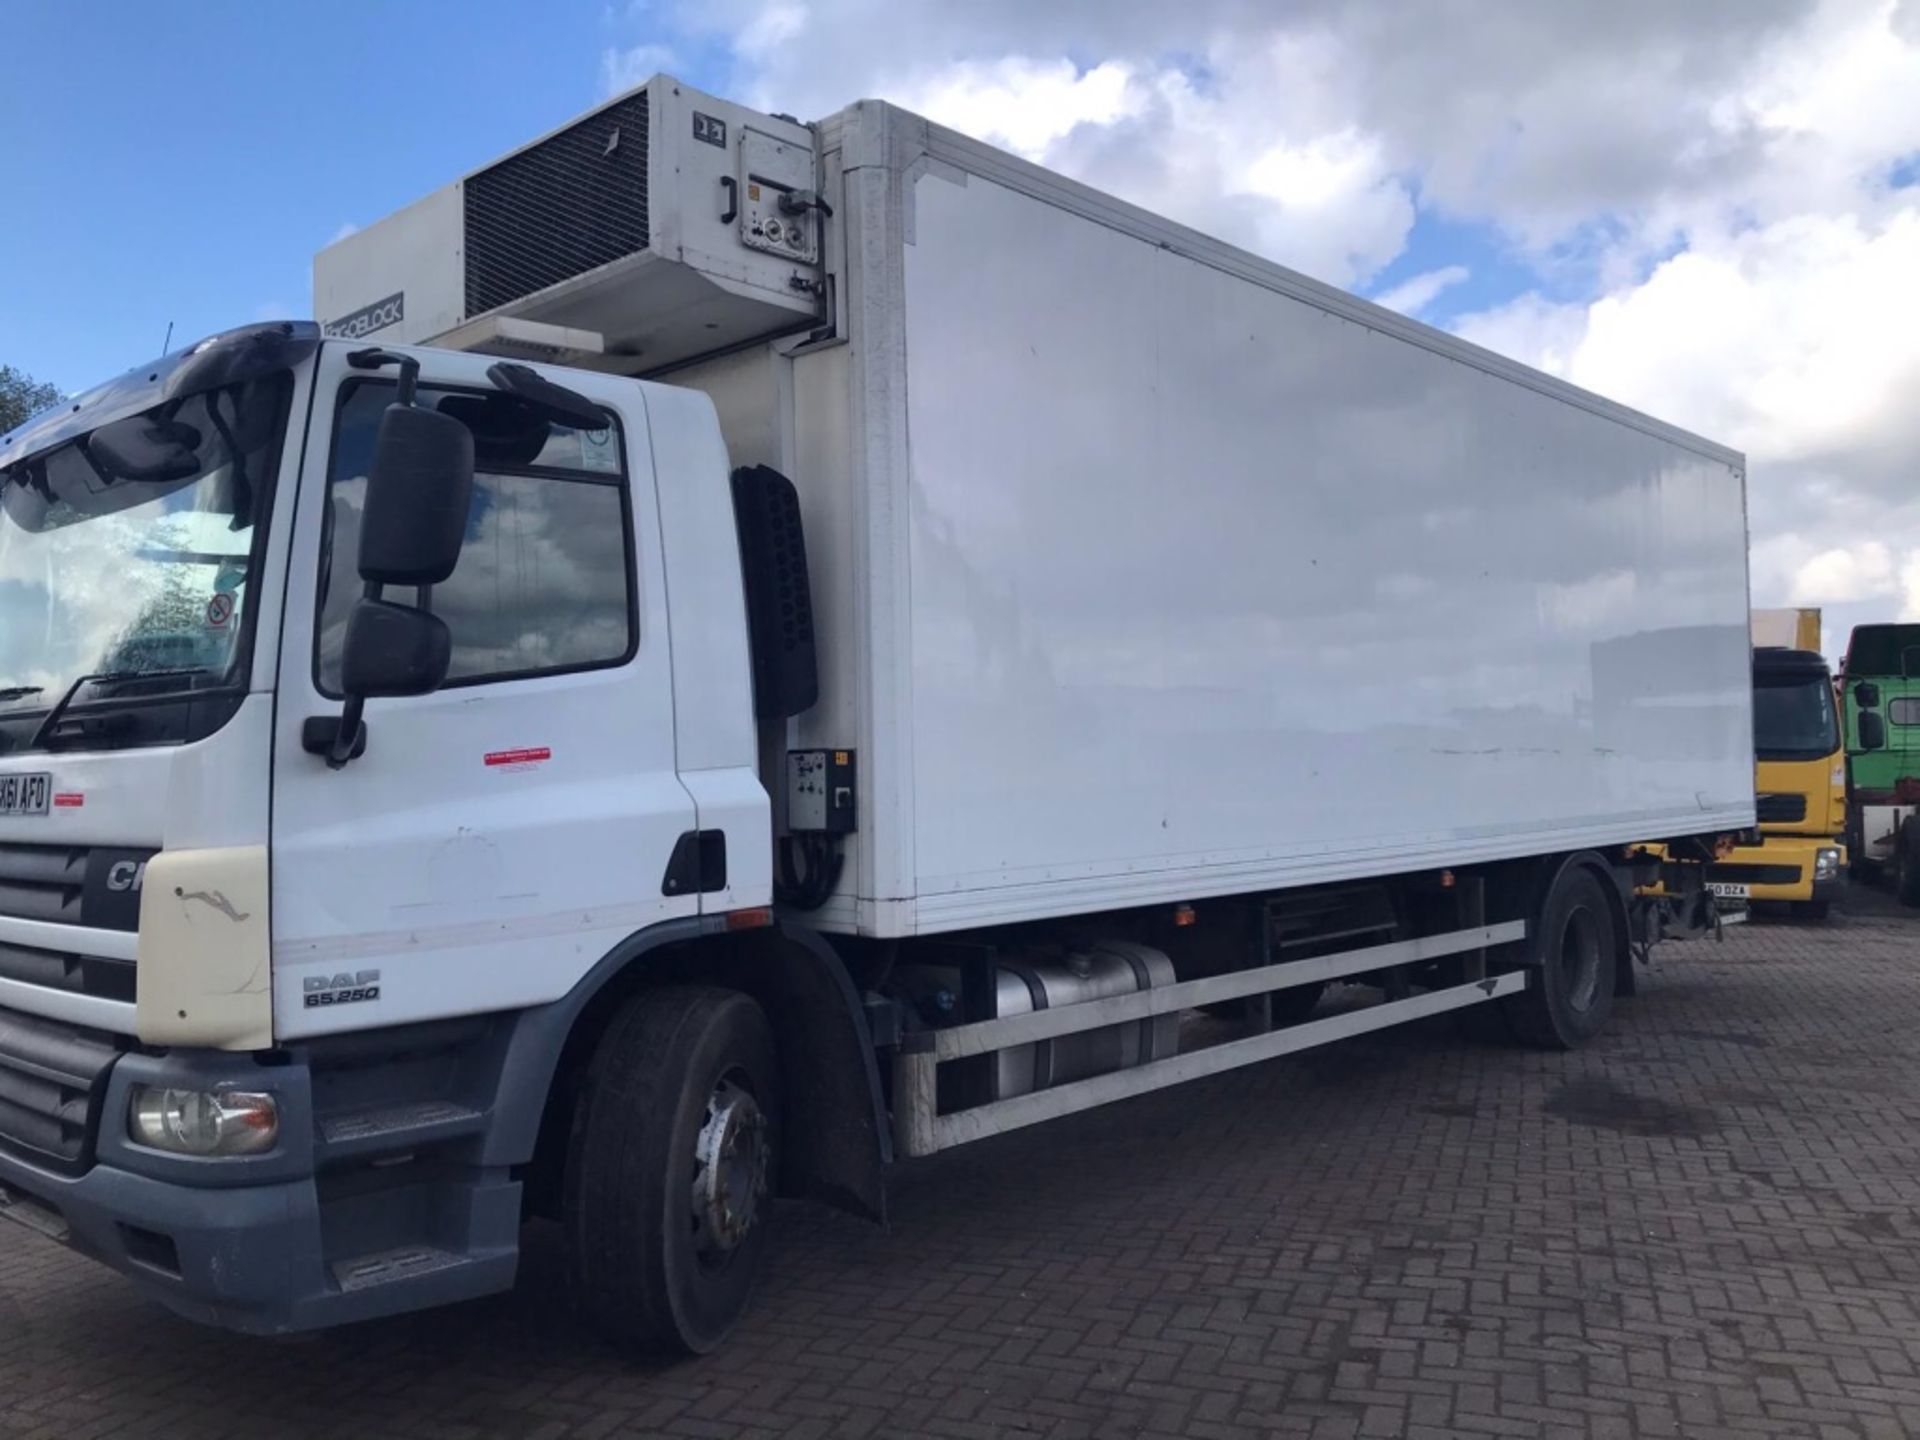 2011 Daf CF65 Refrigerated Truck - Image 3 of 13